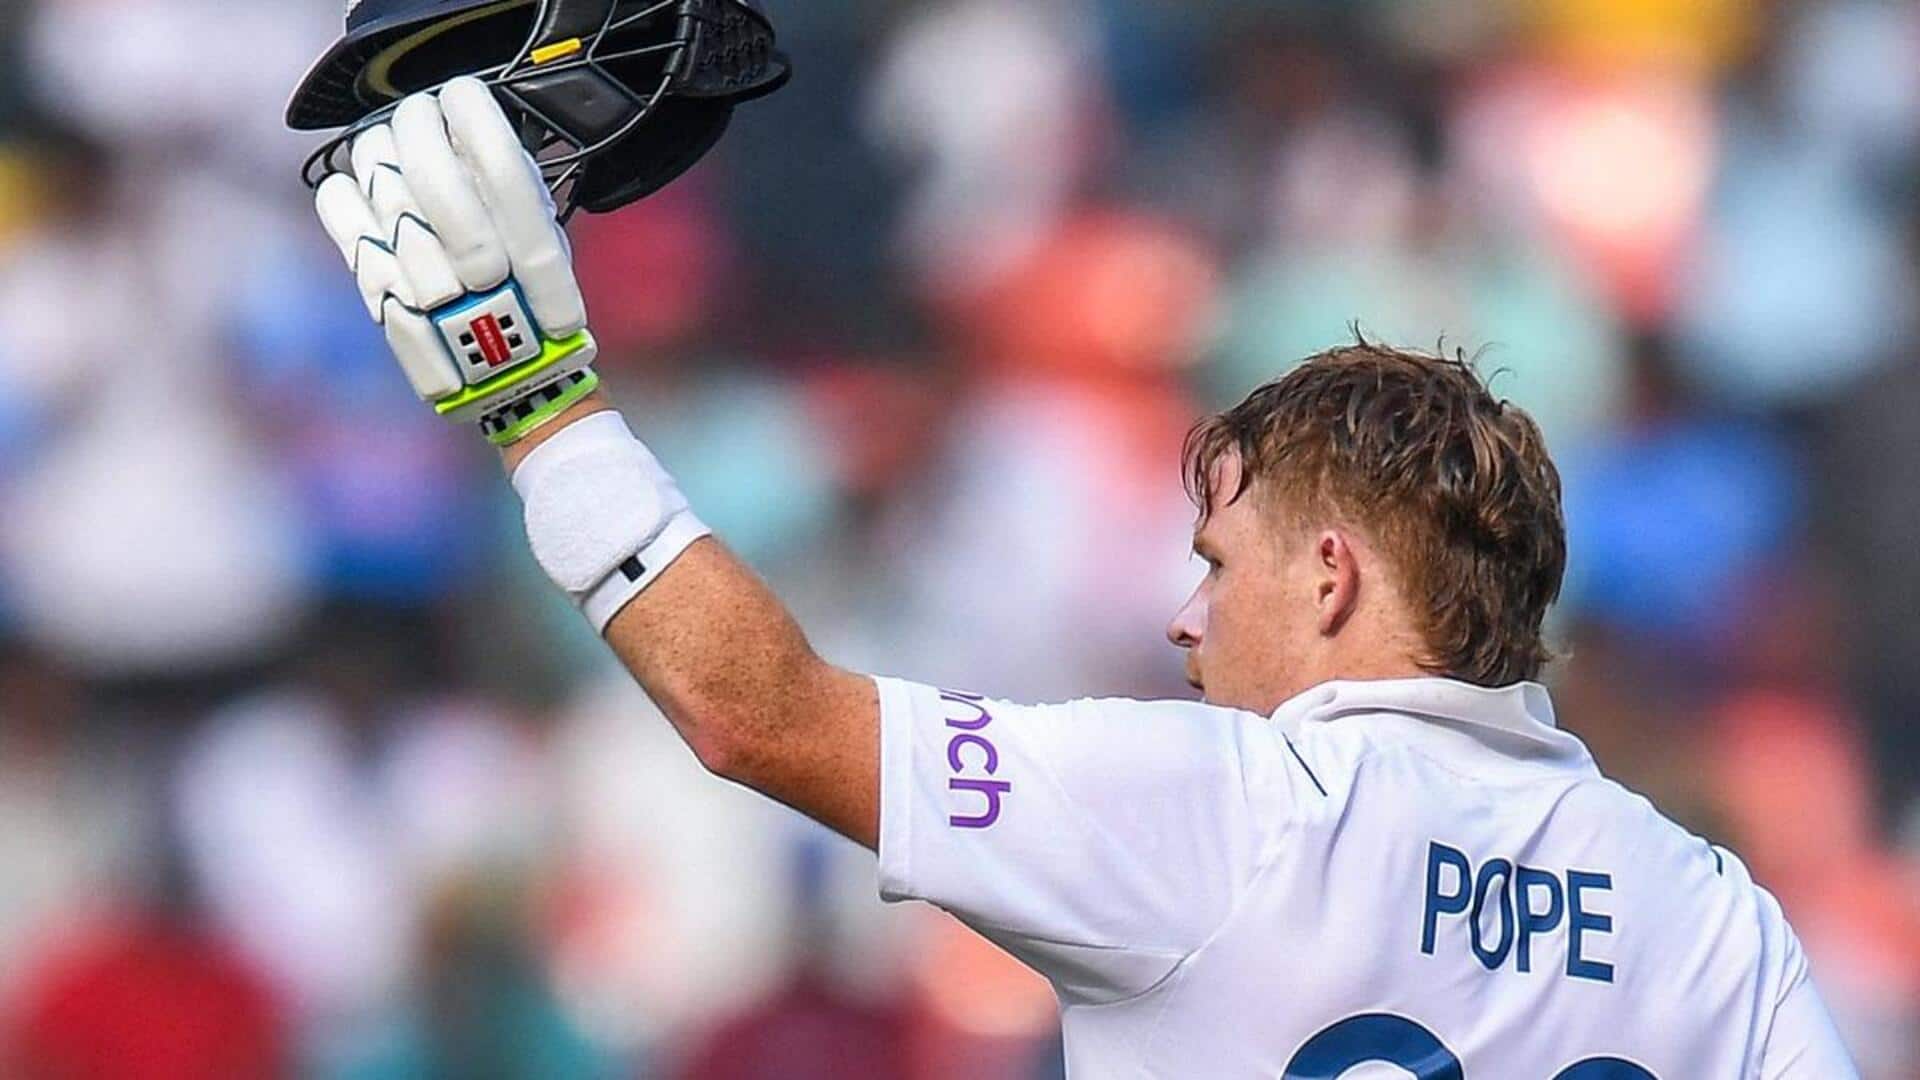 Ollie Pope misses his double-century, breaks records in Hyderabad 